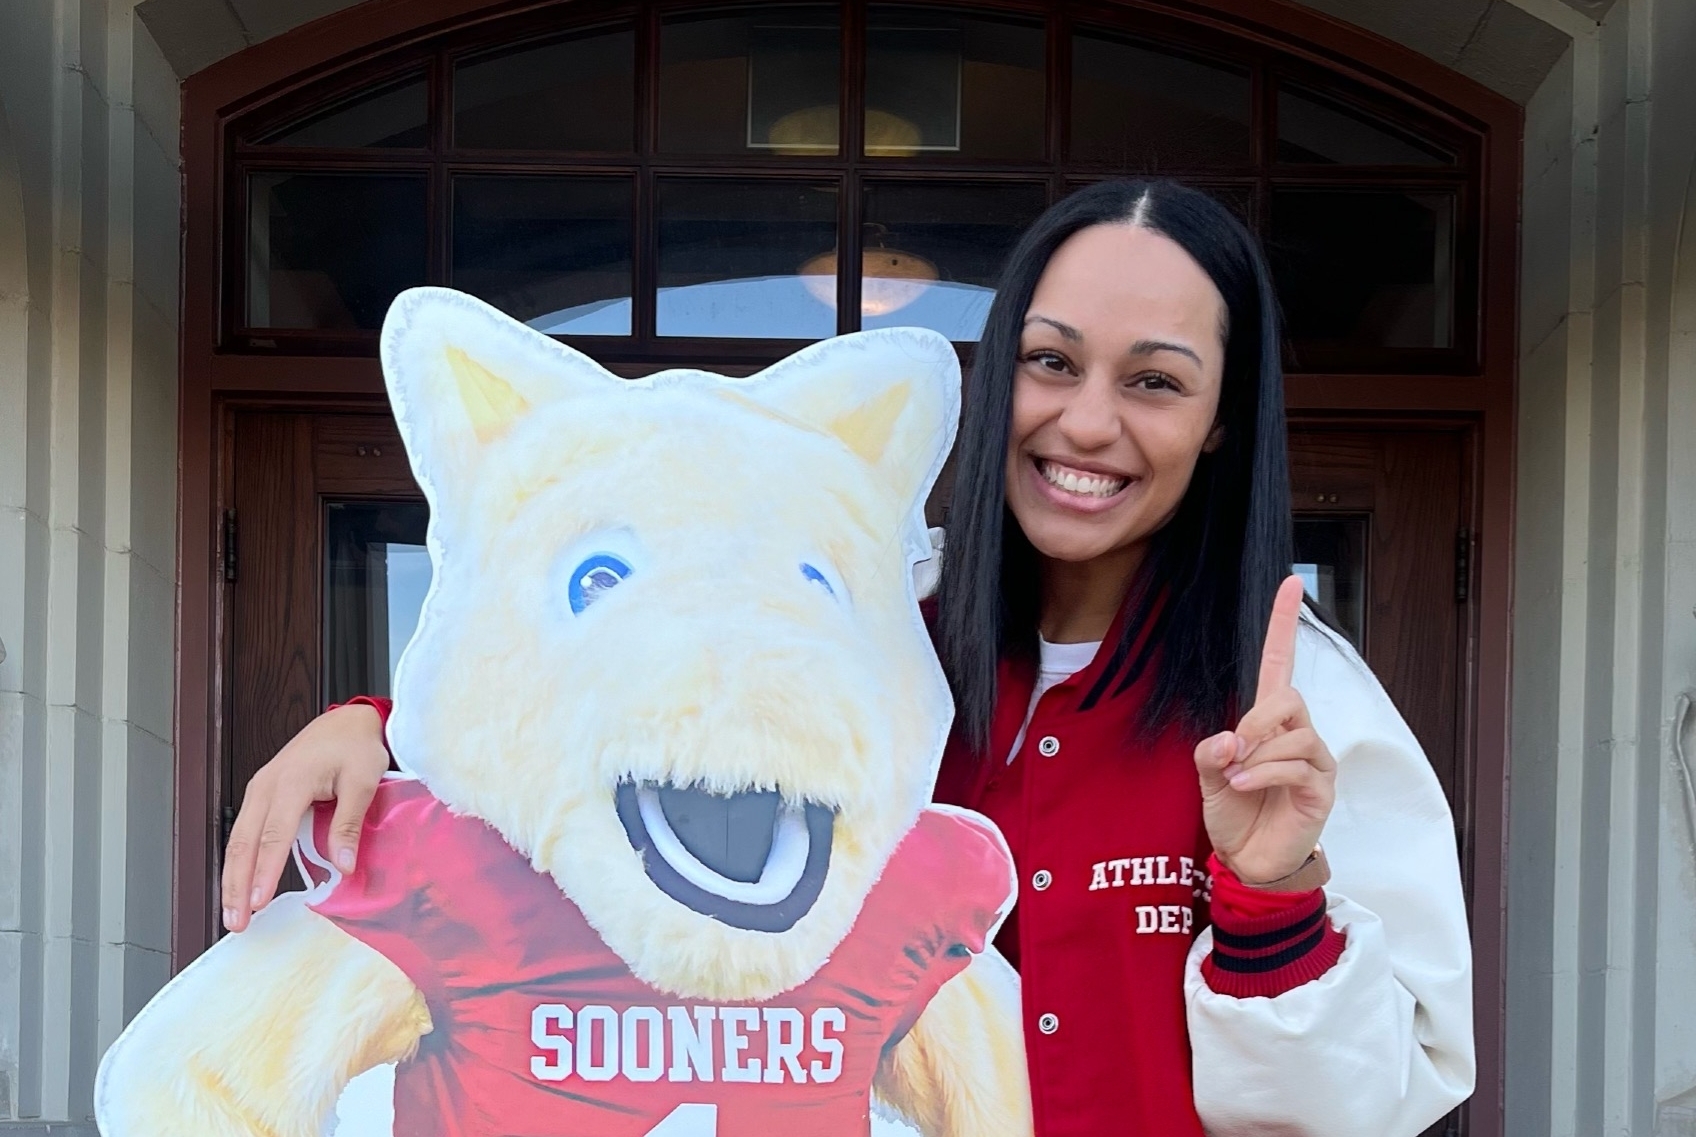 Katie posing with a cut-out of one of OU's mascots, Boomer